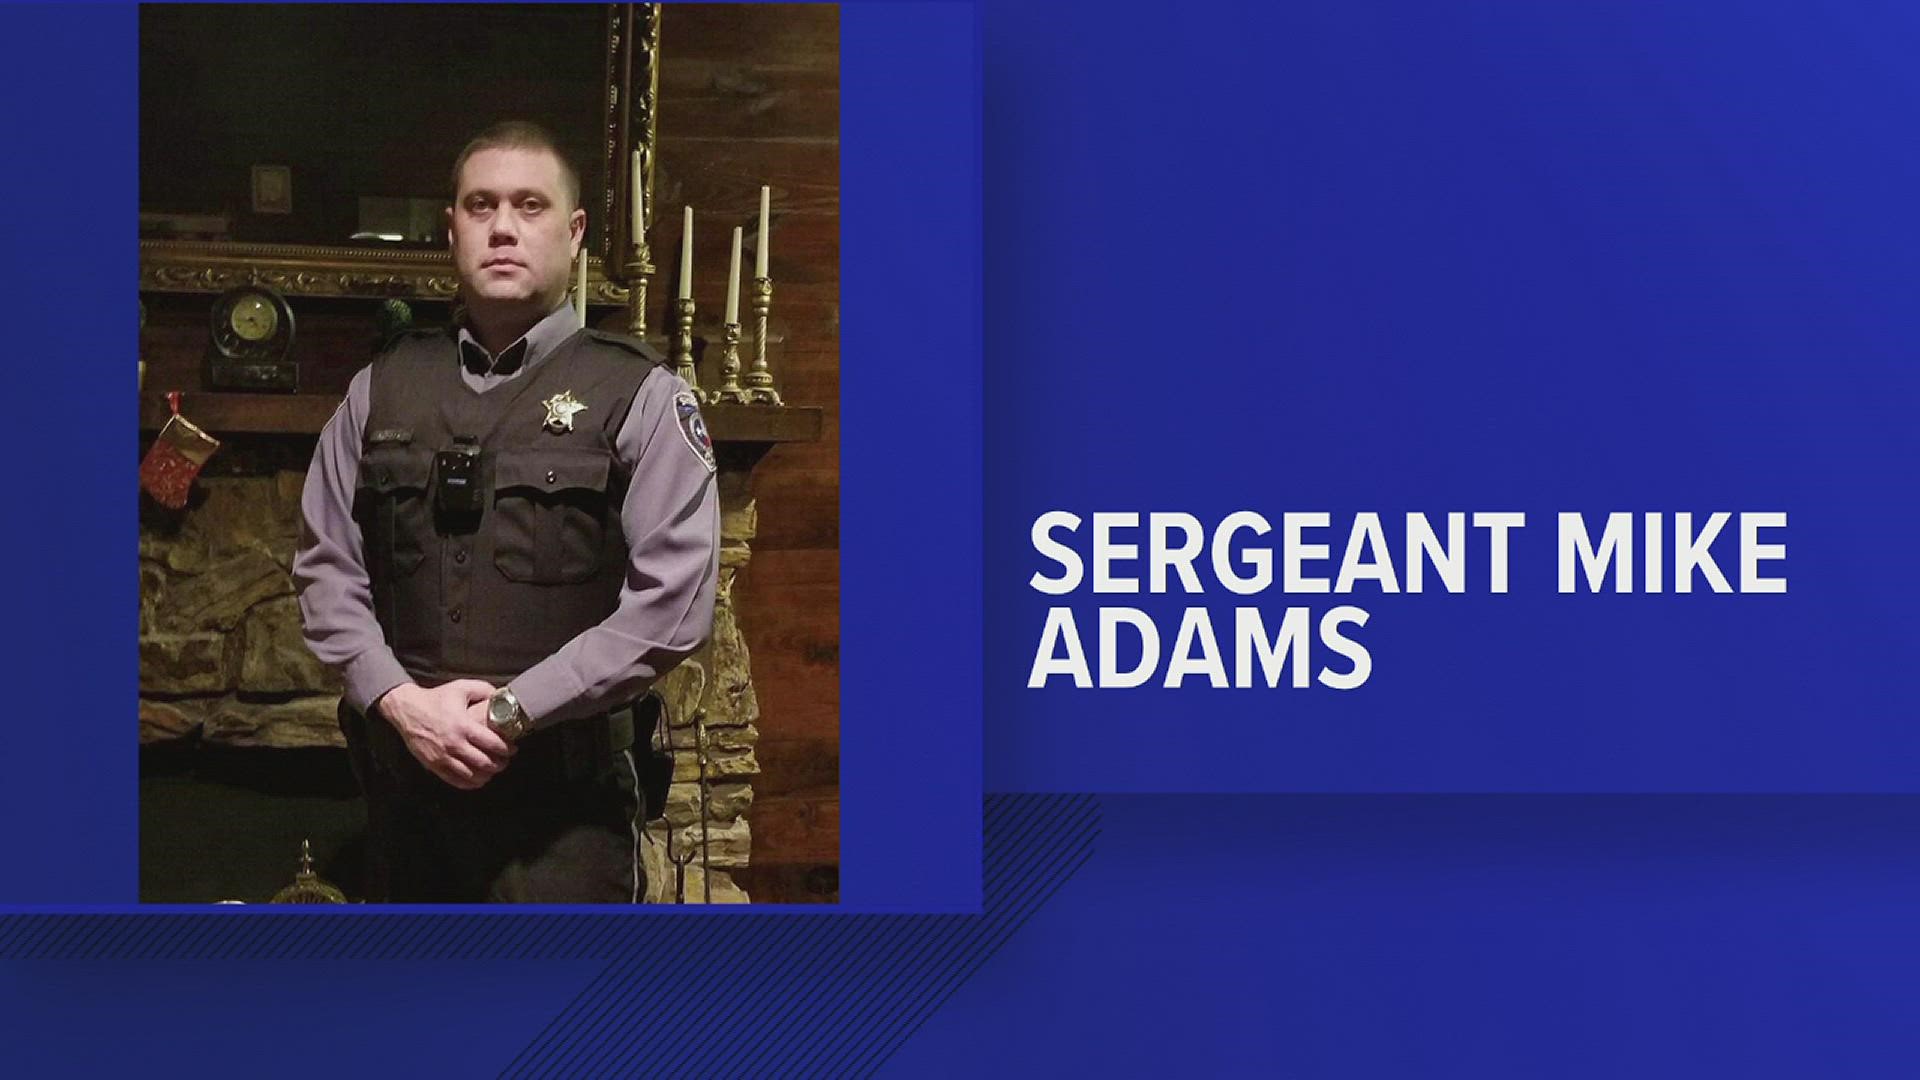 Those who knew and loved Sgt. Michael Robert Adams said he was a good man who was always there for others.